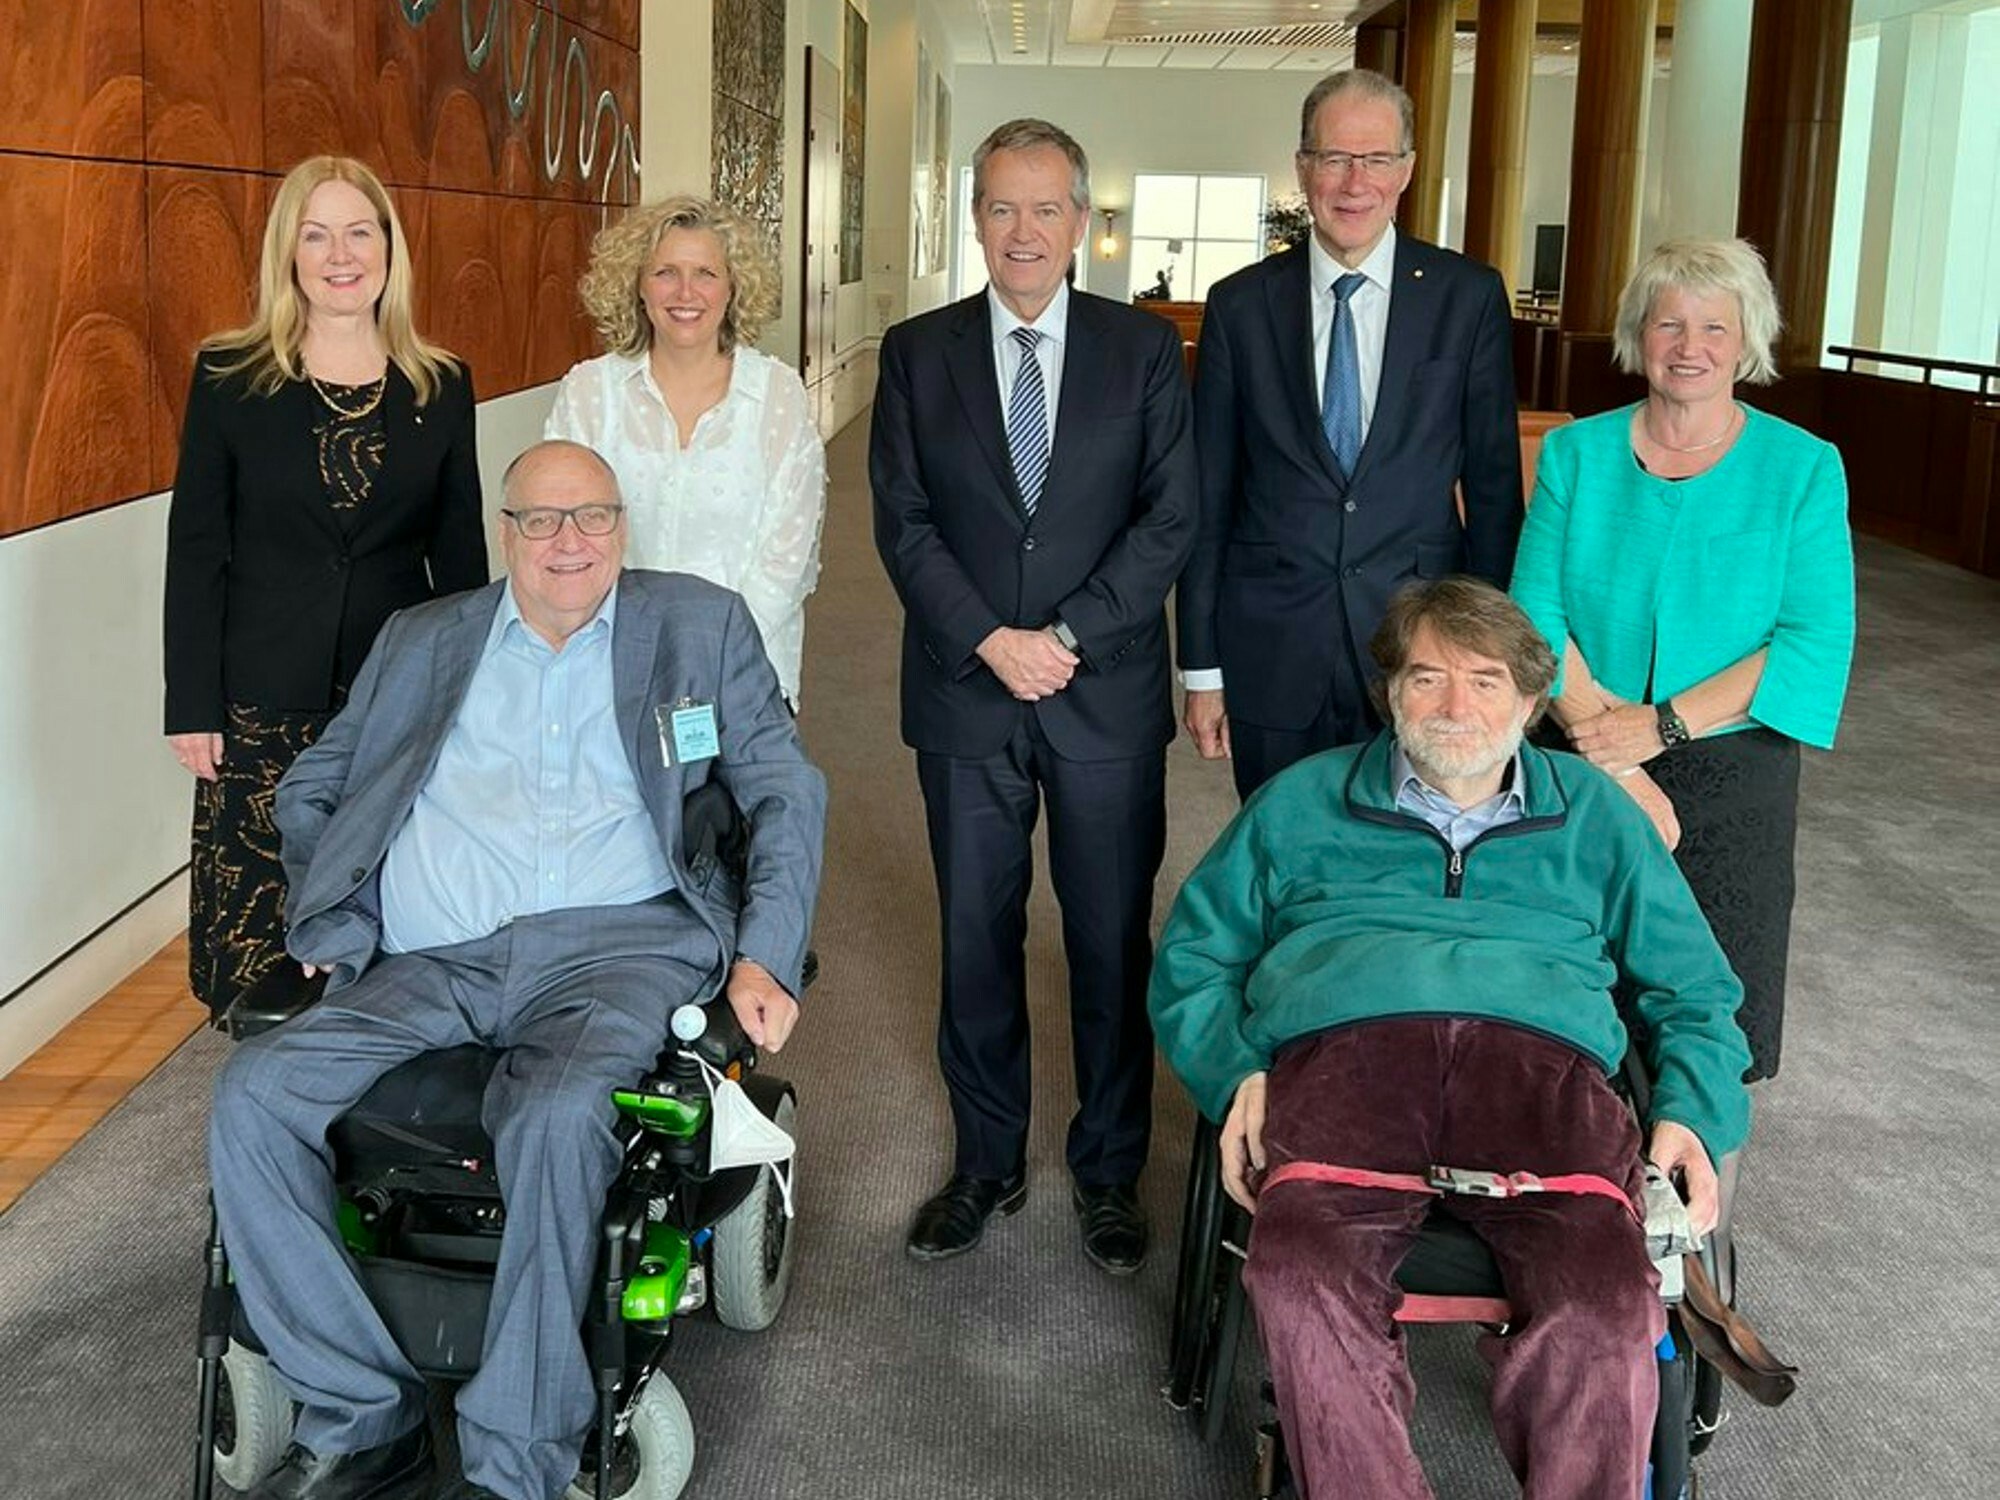 <p>Minister Bill Shorten named Professor Bruce Bonyhady AM and Ms Lisa Paul AO PSM as co-chairs of the NDIS review panel in 2022. [Source: Twitter]</p>
